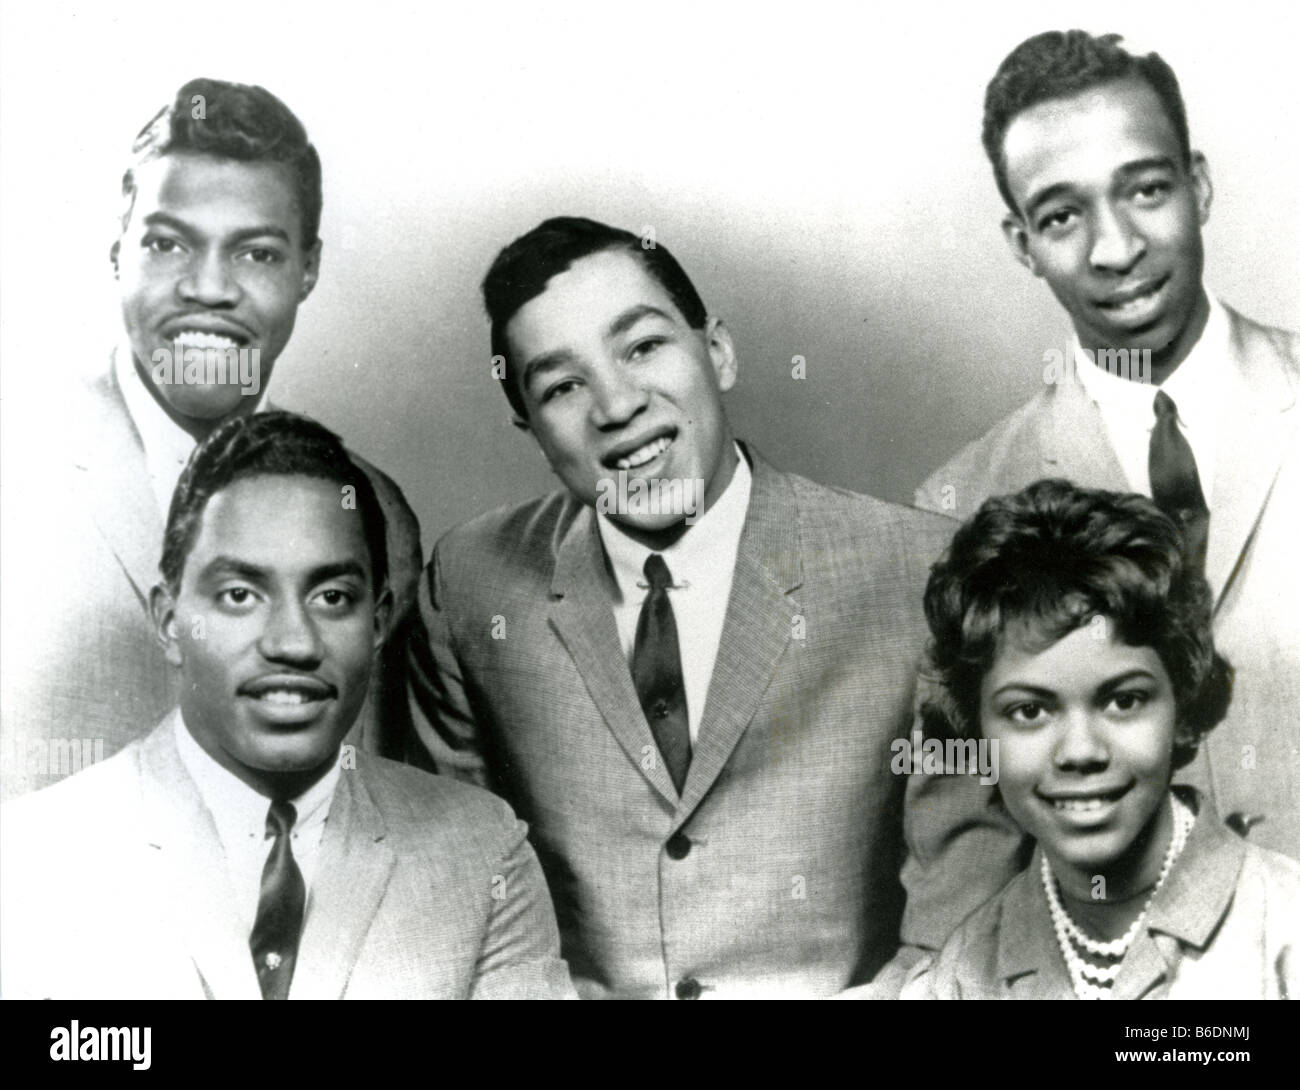 SMOKEY ROBINSON AND THE MIRACLES - Tamla Motown group about 1957. See Description below for names Stock Photo